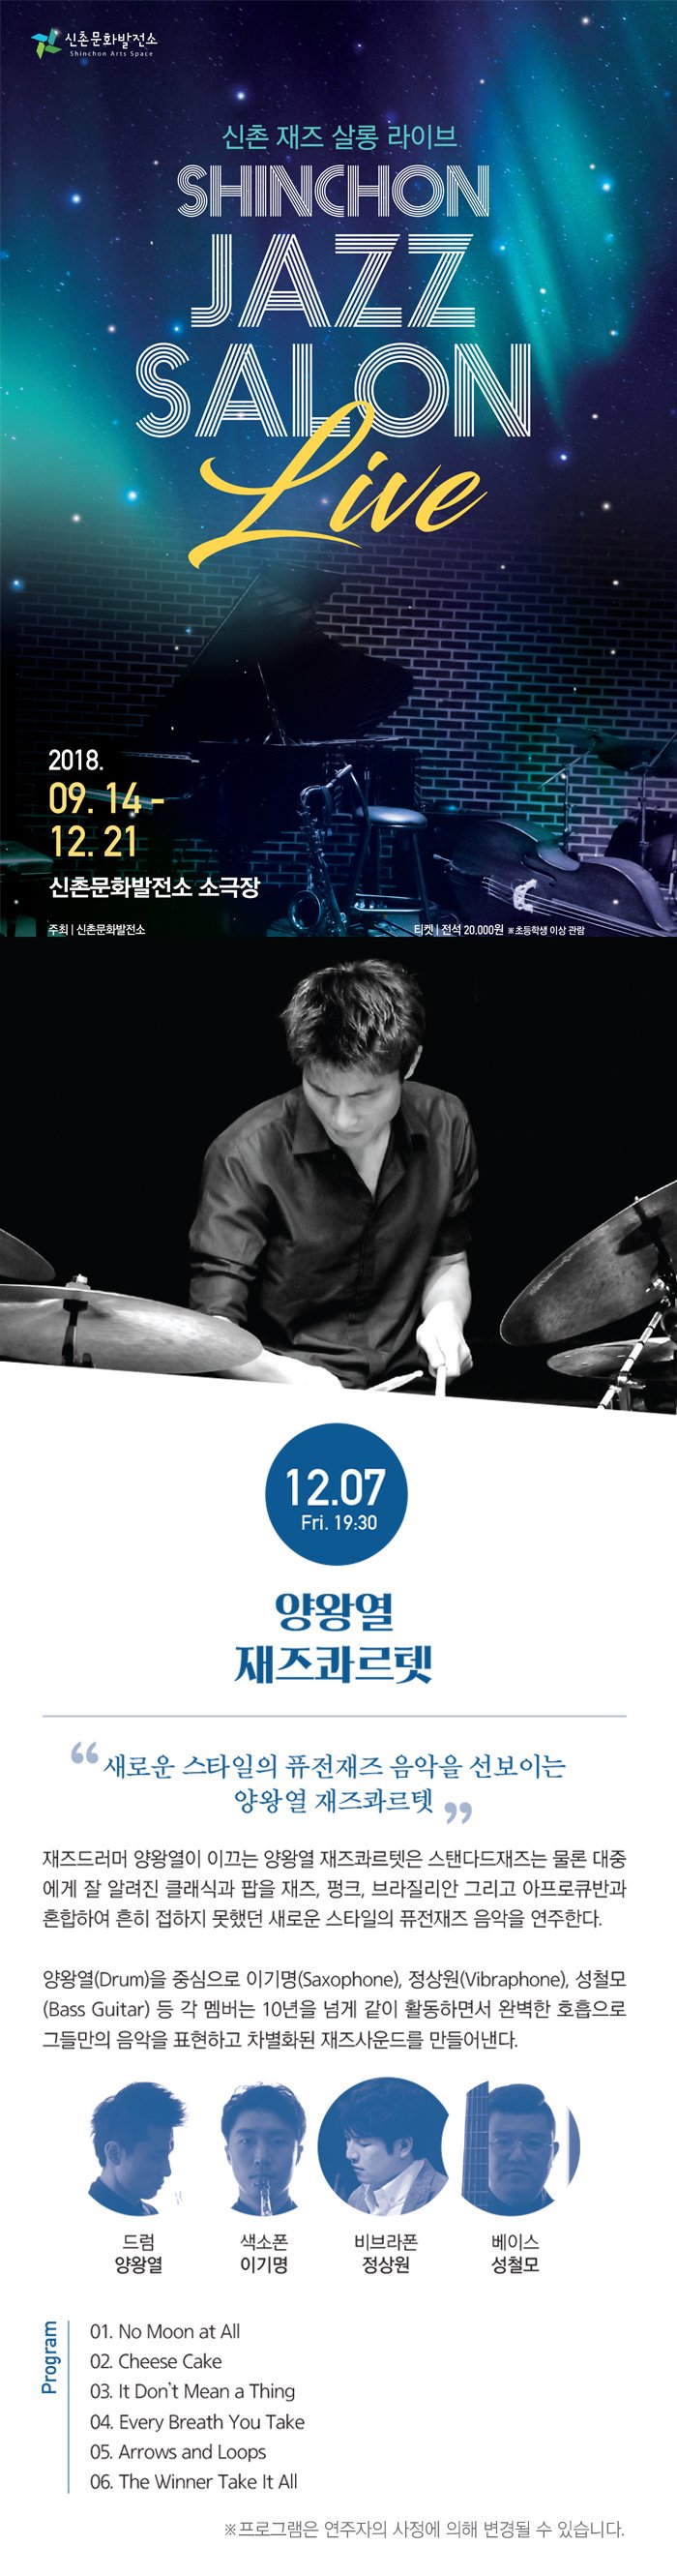 ̹ȭ Shinchon Arts Space    ̺ SHINCHON JAZZ SALON 2018. 09.14 - 12.21 .  ̹ȭ ұ - 1 - ֽ̹ȭ  | ̹ȭ Ƽ |  20,000 ʵл ̻  12.07 Fri. 19:30 տ  ο Ÿ ǻ  ̴ տ ⸣ 巯 տ ̲ տ ⸣ Ĵٵ     ˷ Ŭİ  , ũ,  ׸ ťݰ ȥϿ   ߴ ο Ÿ ǻ  Ѵ. տ(Drum) ߽ ̱(Saxophone), (Vibraphone), ö (Bass Guitar)    10 Ѱ  Ȱϸ鼭 Ϻ ȣ ׵鸸  ǥϰ ȭ 带 . 巳 տ  ̱   ̽ ö Program 01. No Moon at All 02. Cheese Cake 03. It Don't Mean a Thing | 04. Every Breath You Take 05. Arrows and Loops 06. The Winner Take It All  α׷      ֽϴ.  - 02-330-4393 